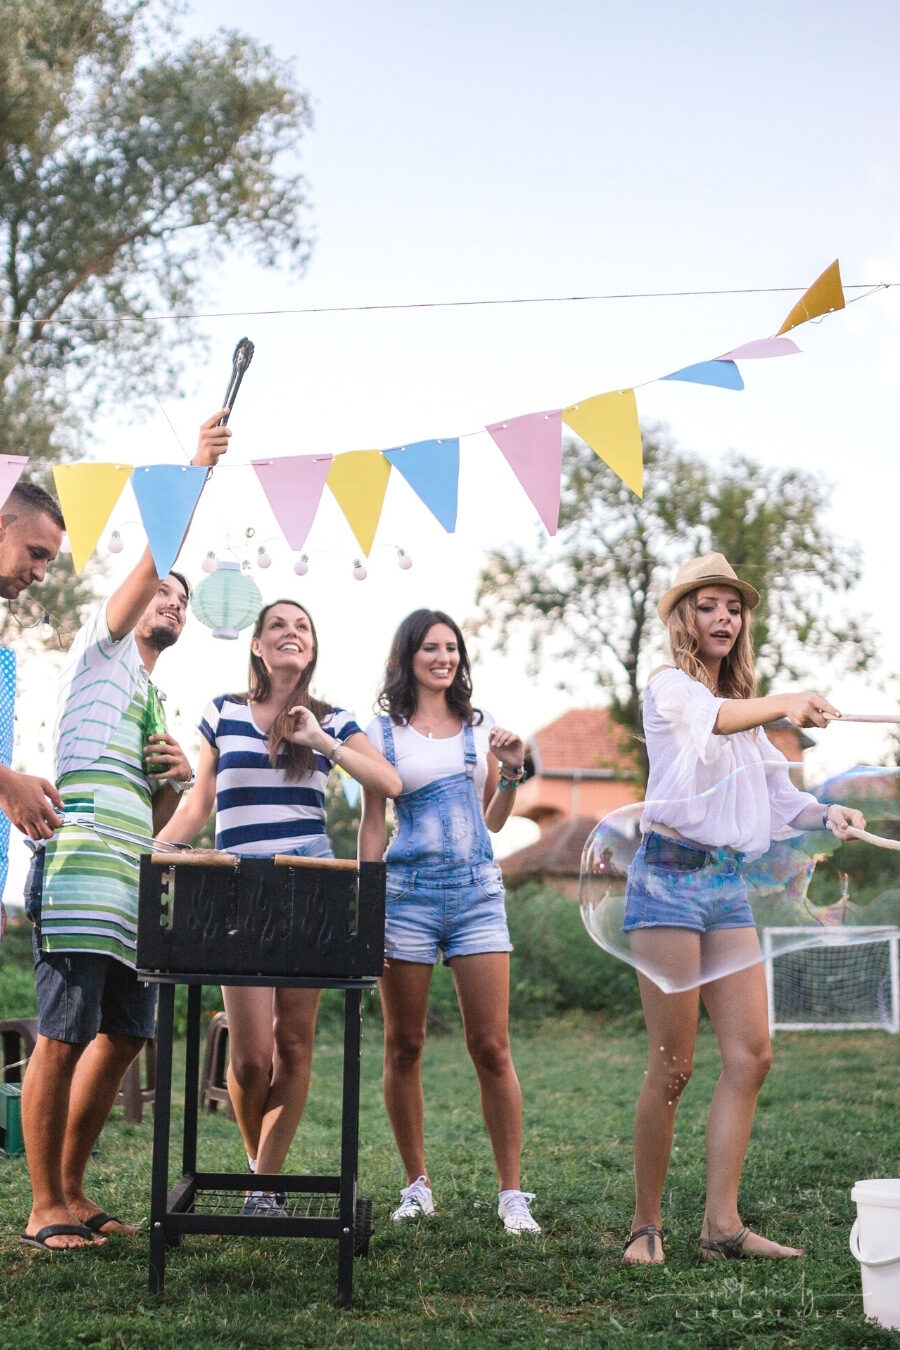 Some Clever Ideas That’ll Make Your Yard Party-Ready